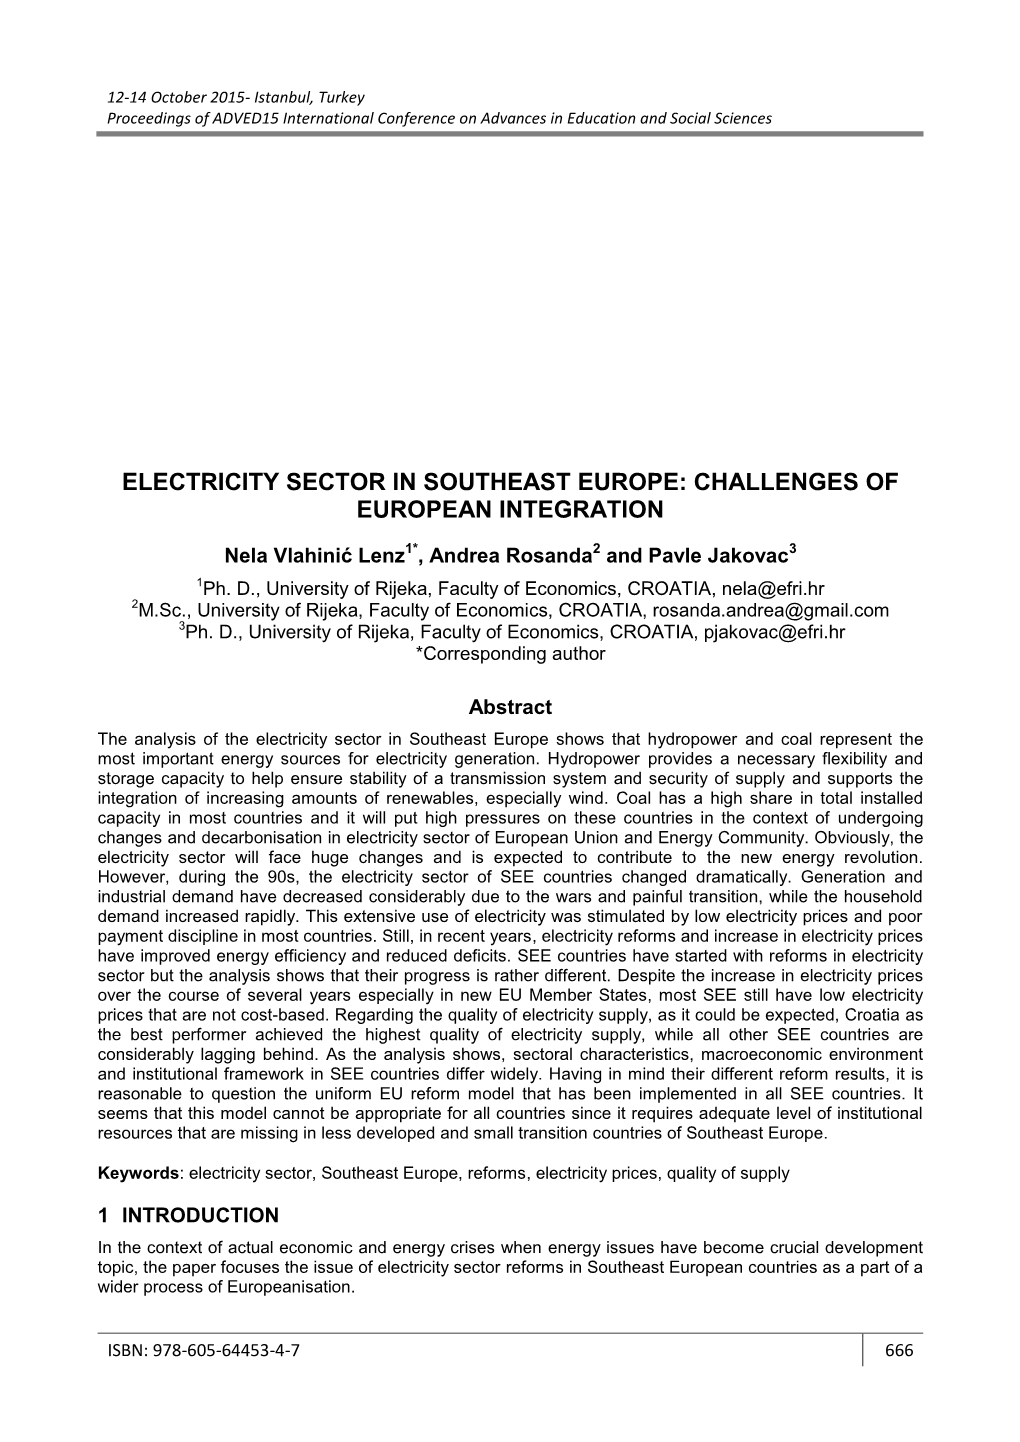 Electricity Sector in Southeast Europe: Challenges of European Integration